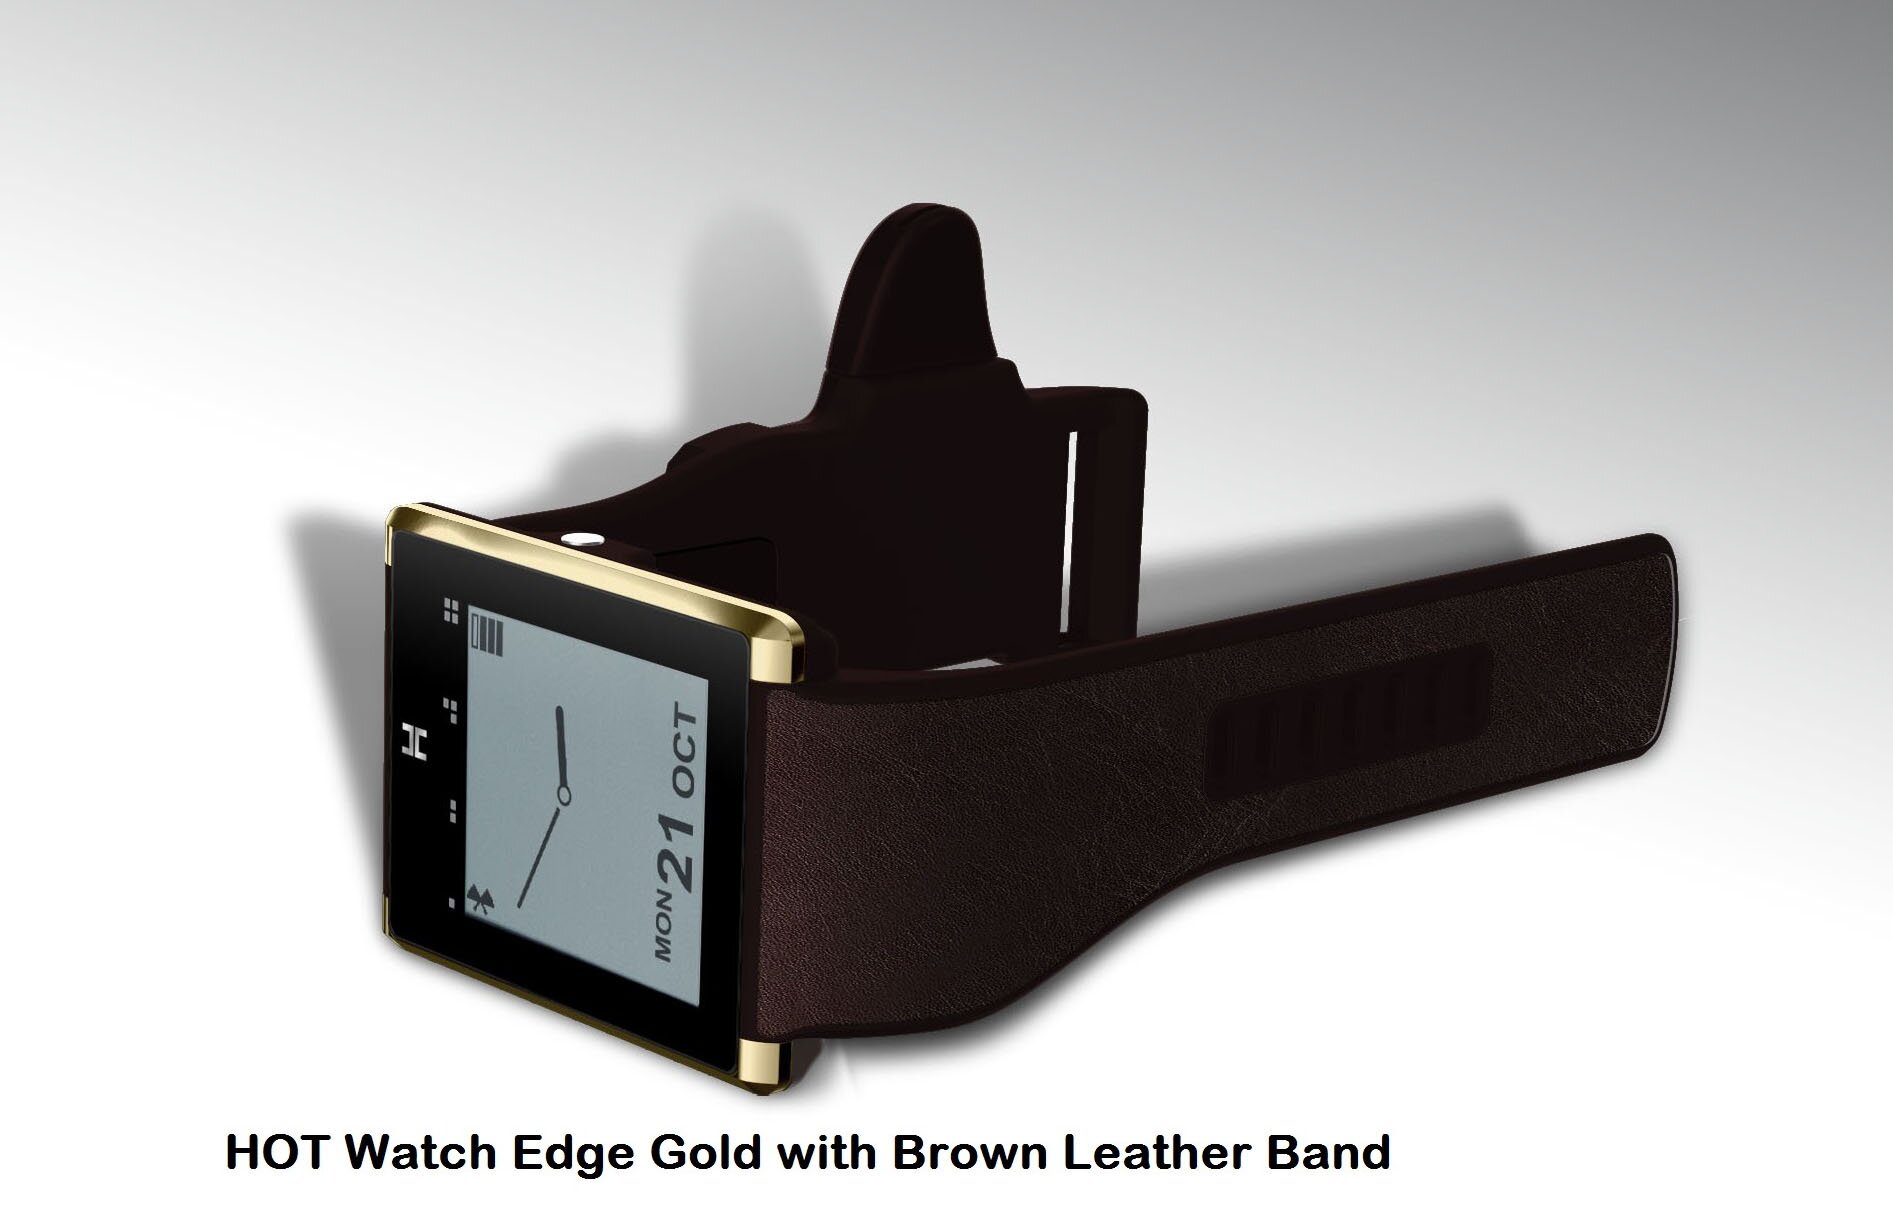 HOT Smart Watch Edge Gold with Brown Leather Band